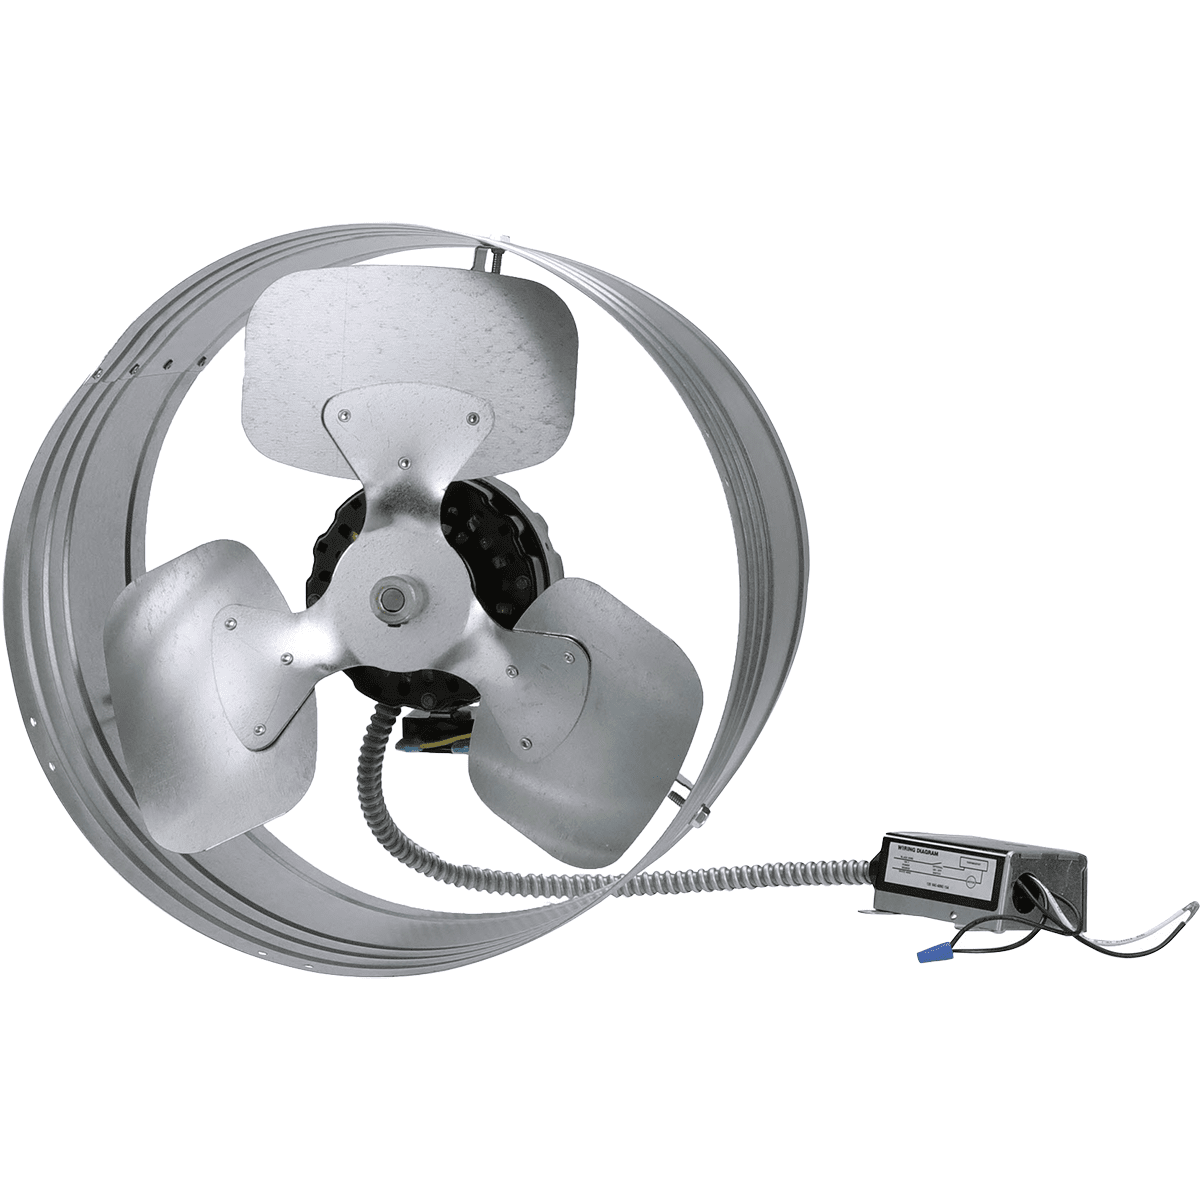 TPI GV4052BG 15-In. Gable Exhaust Fan w/ Thermostat